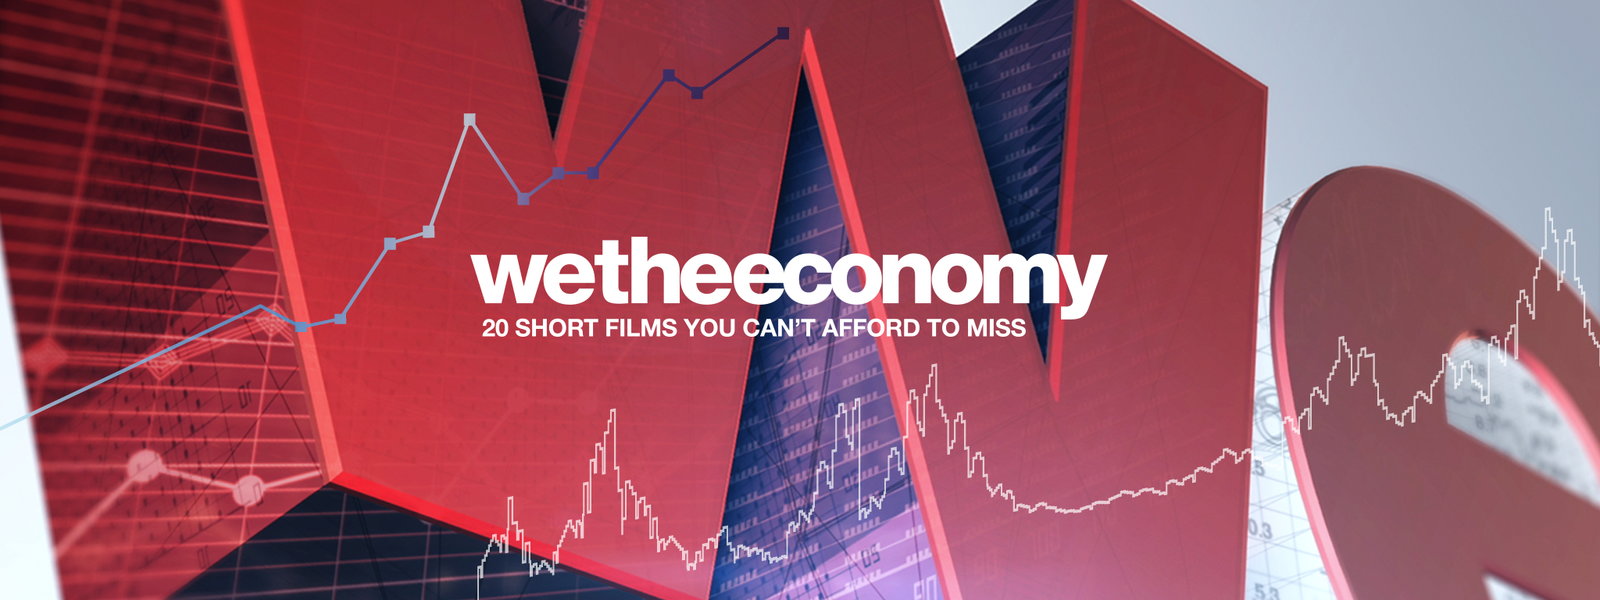 We the Economy: 20 Short Films You Can't Afford to Miss (2014) постер